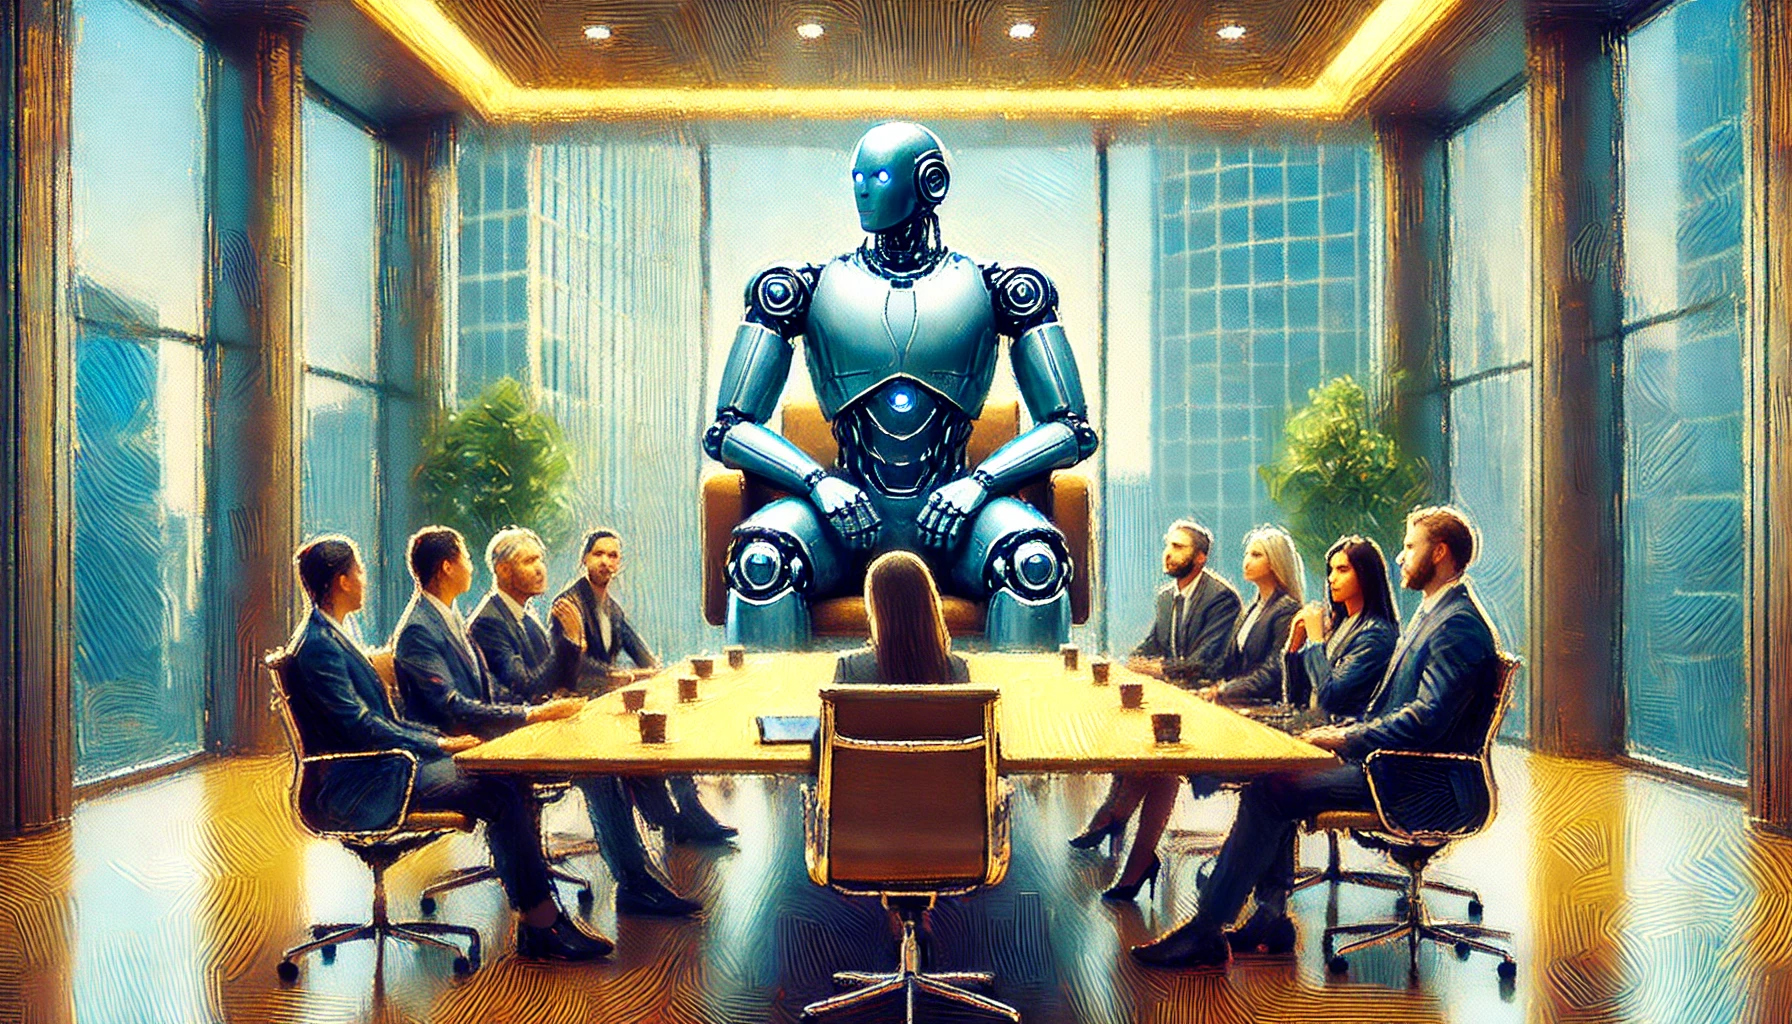 A robot at the head of a board room table with humans seated at the table.